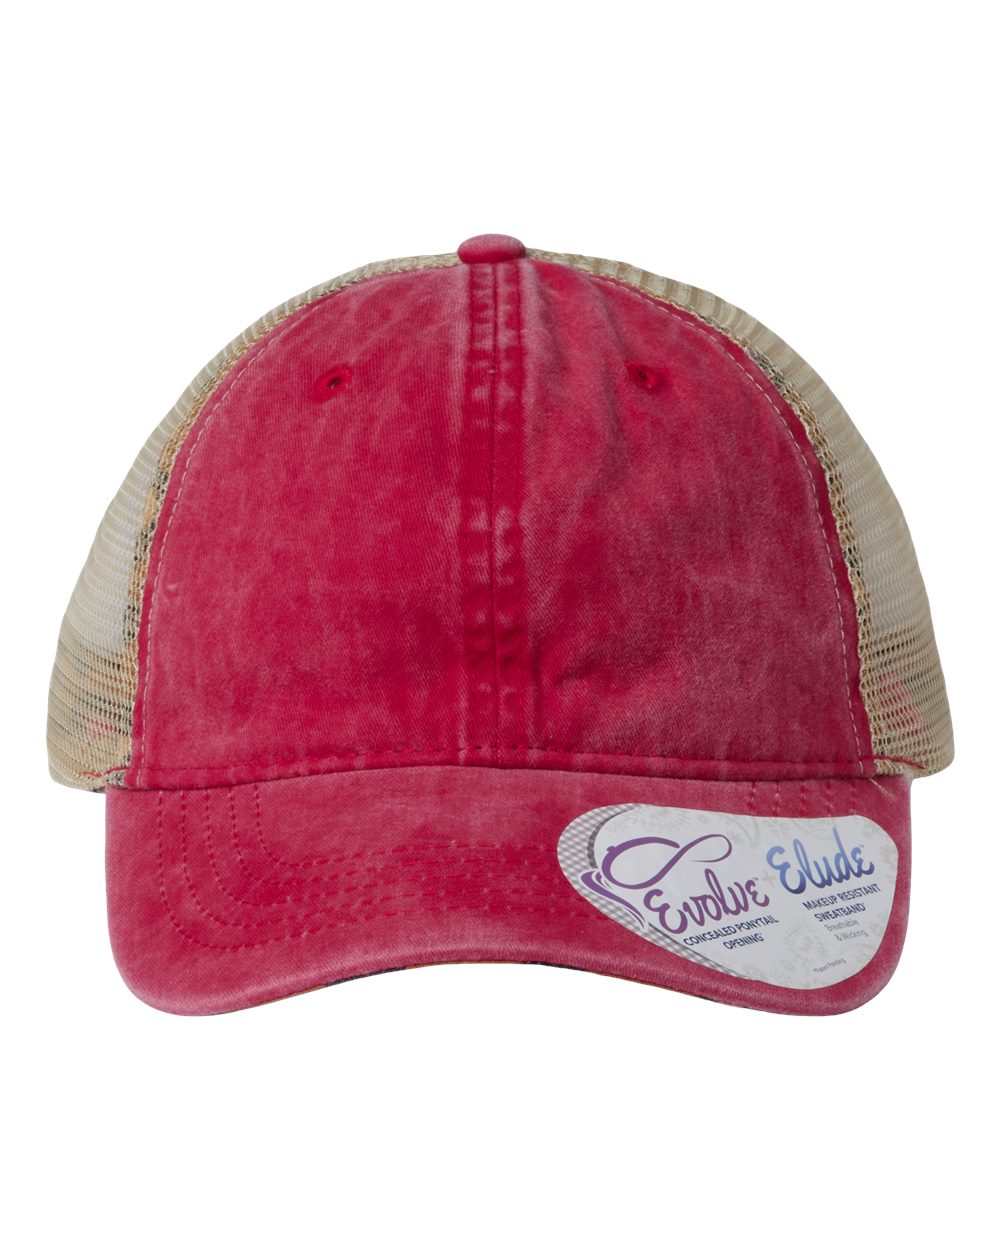 A women's washed mesh-back cap in red with leopard print on the front panel.